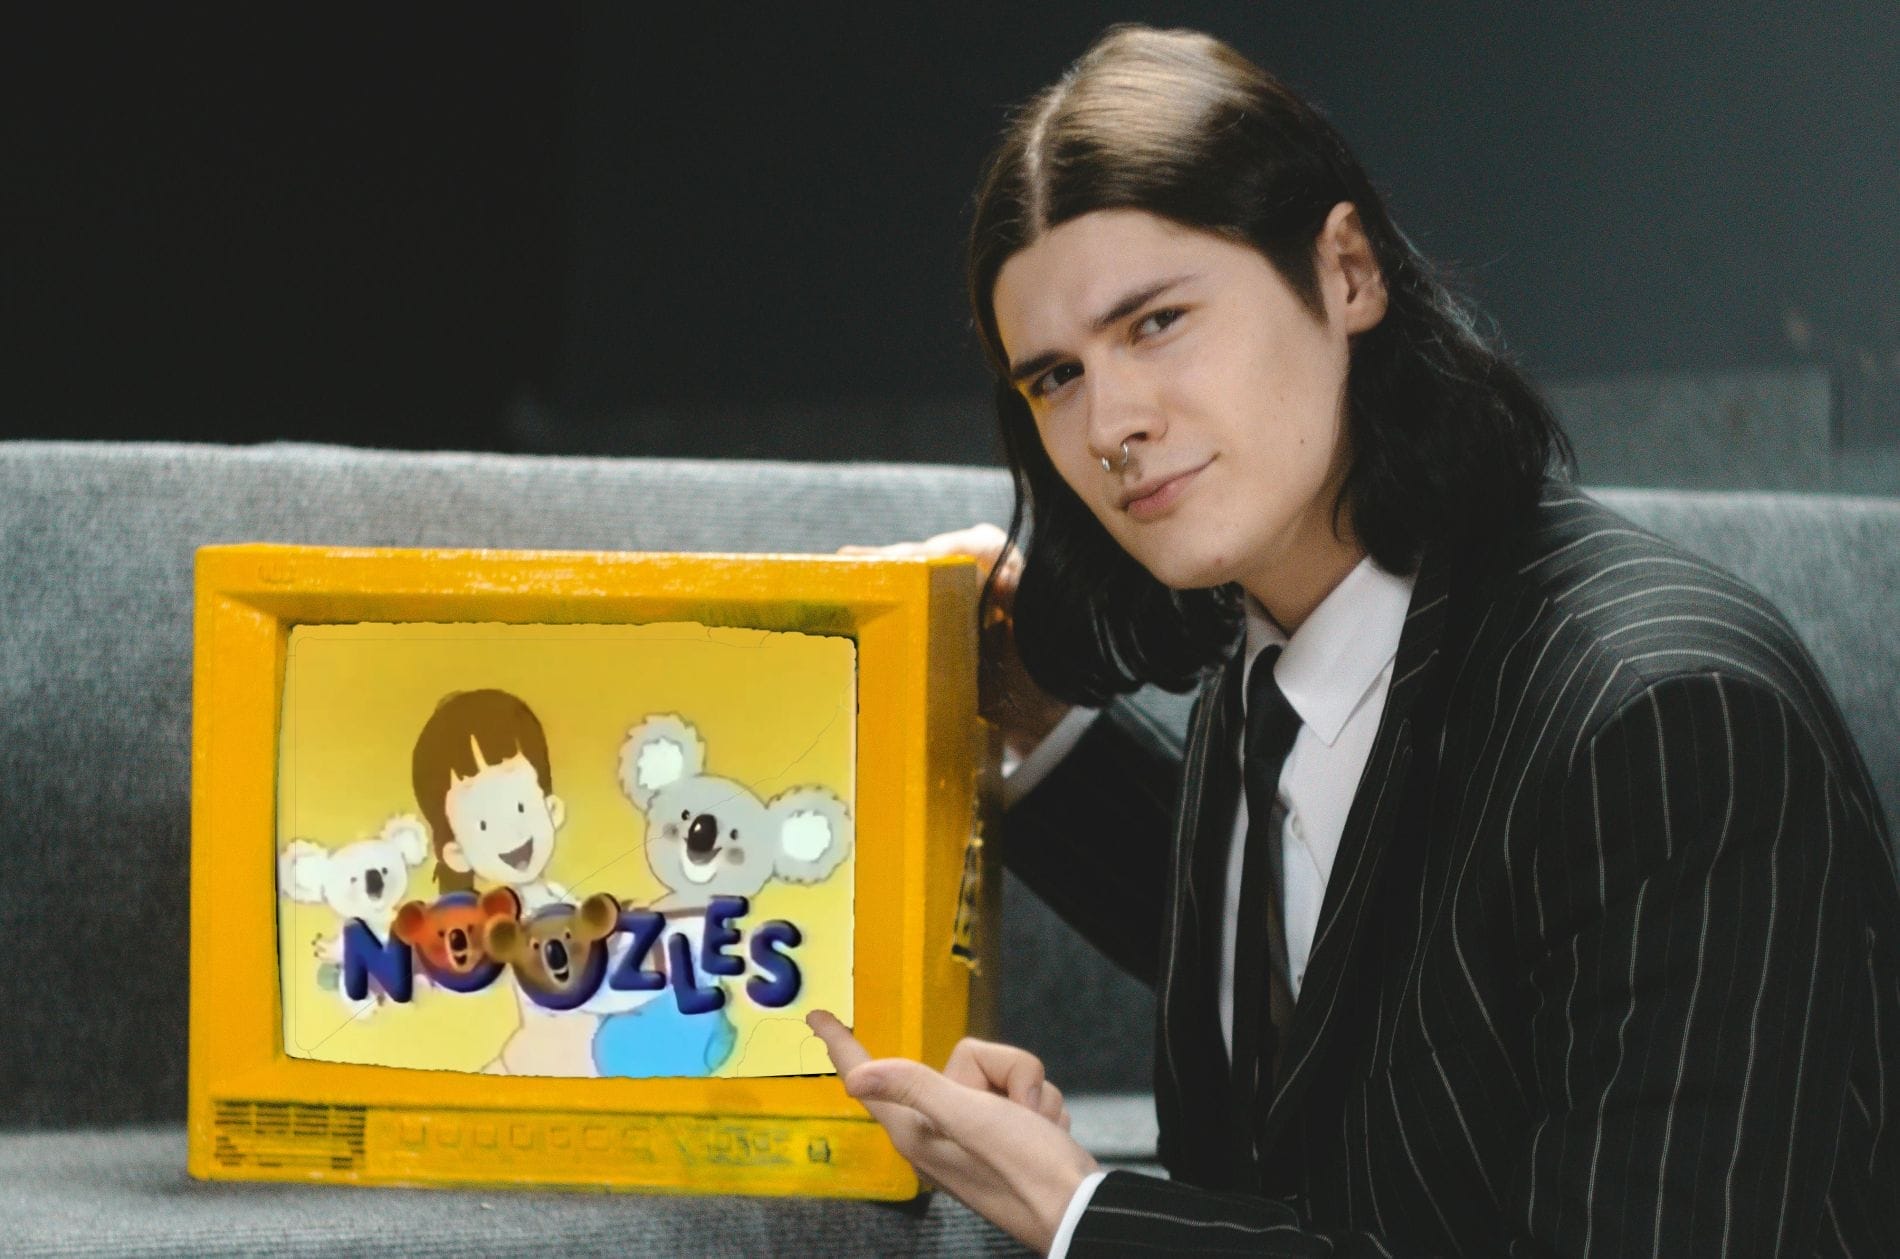 A man in a suit looks seriously as he points toward a yellow TV that's playing Noozles.